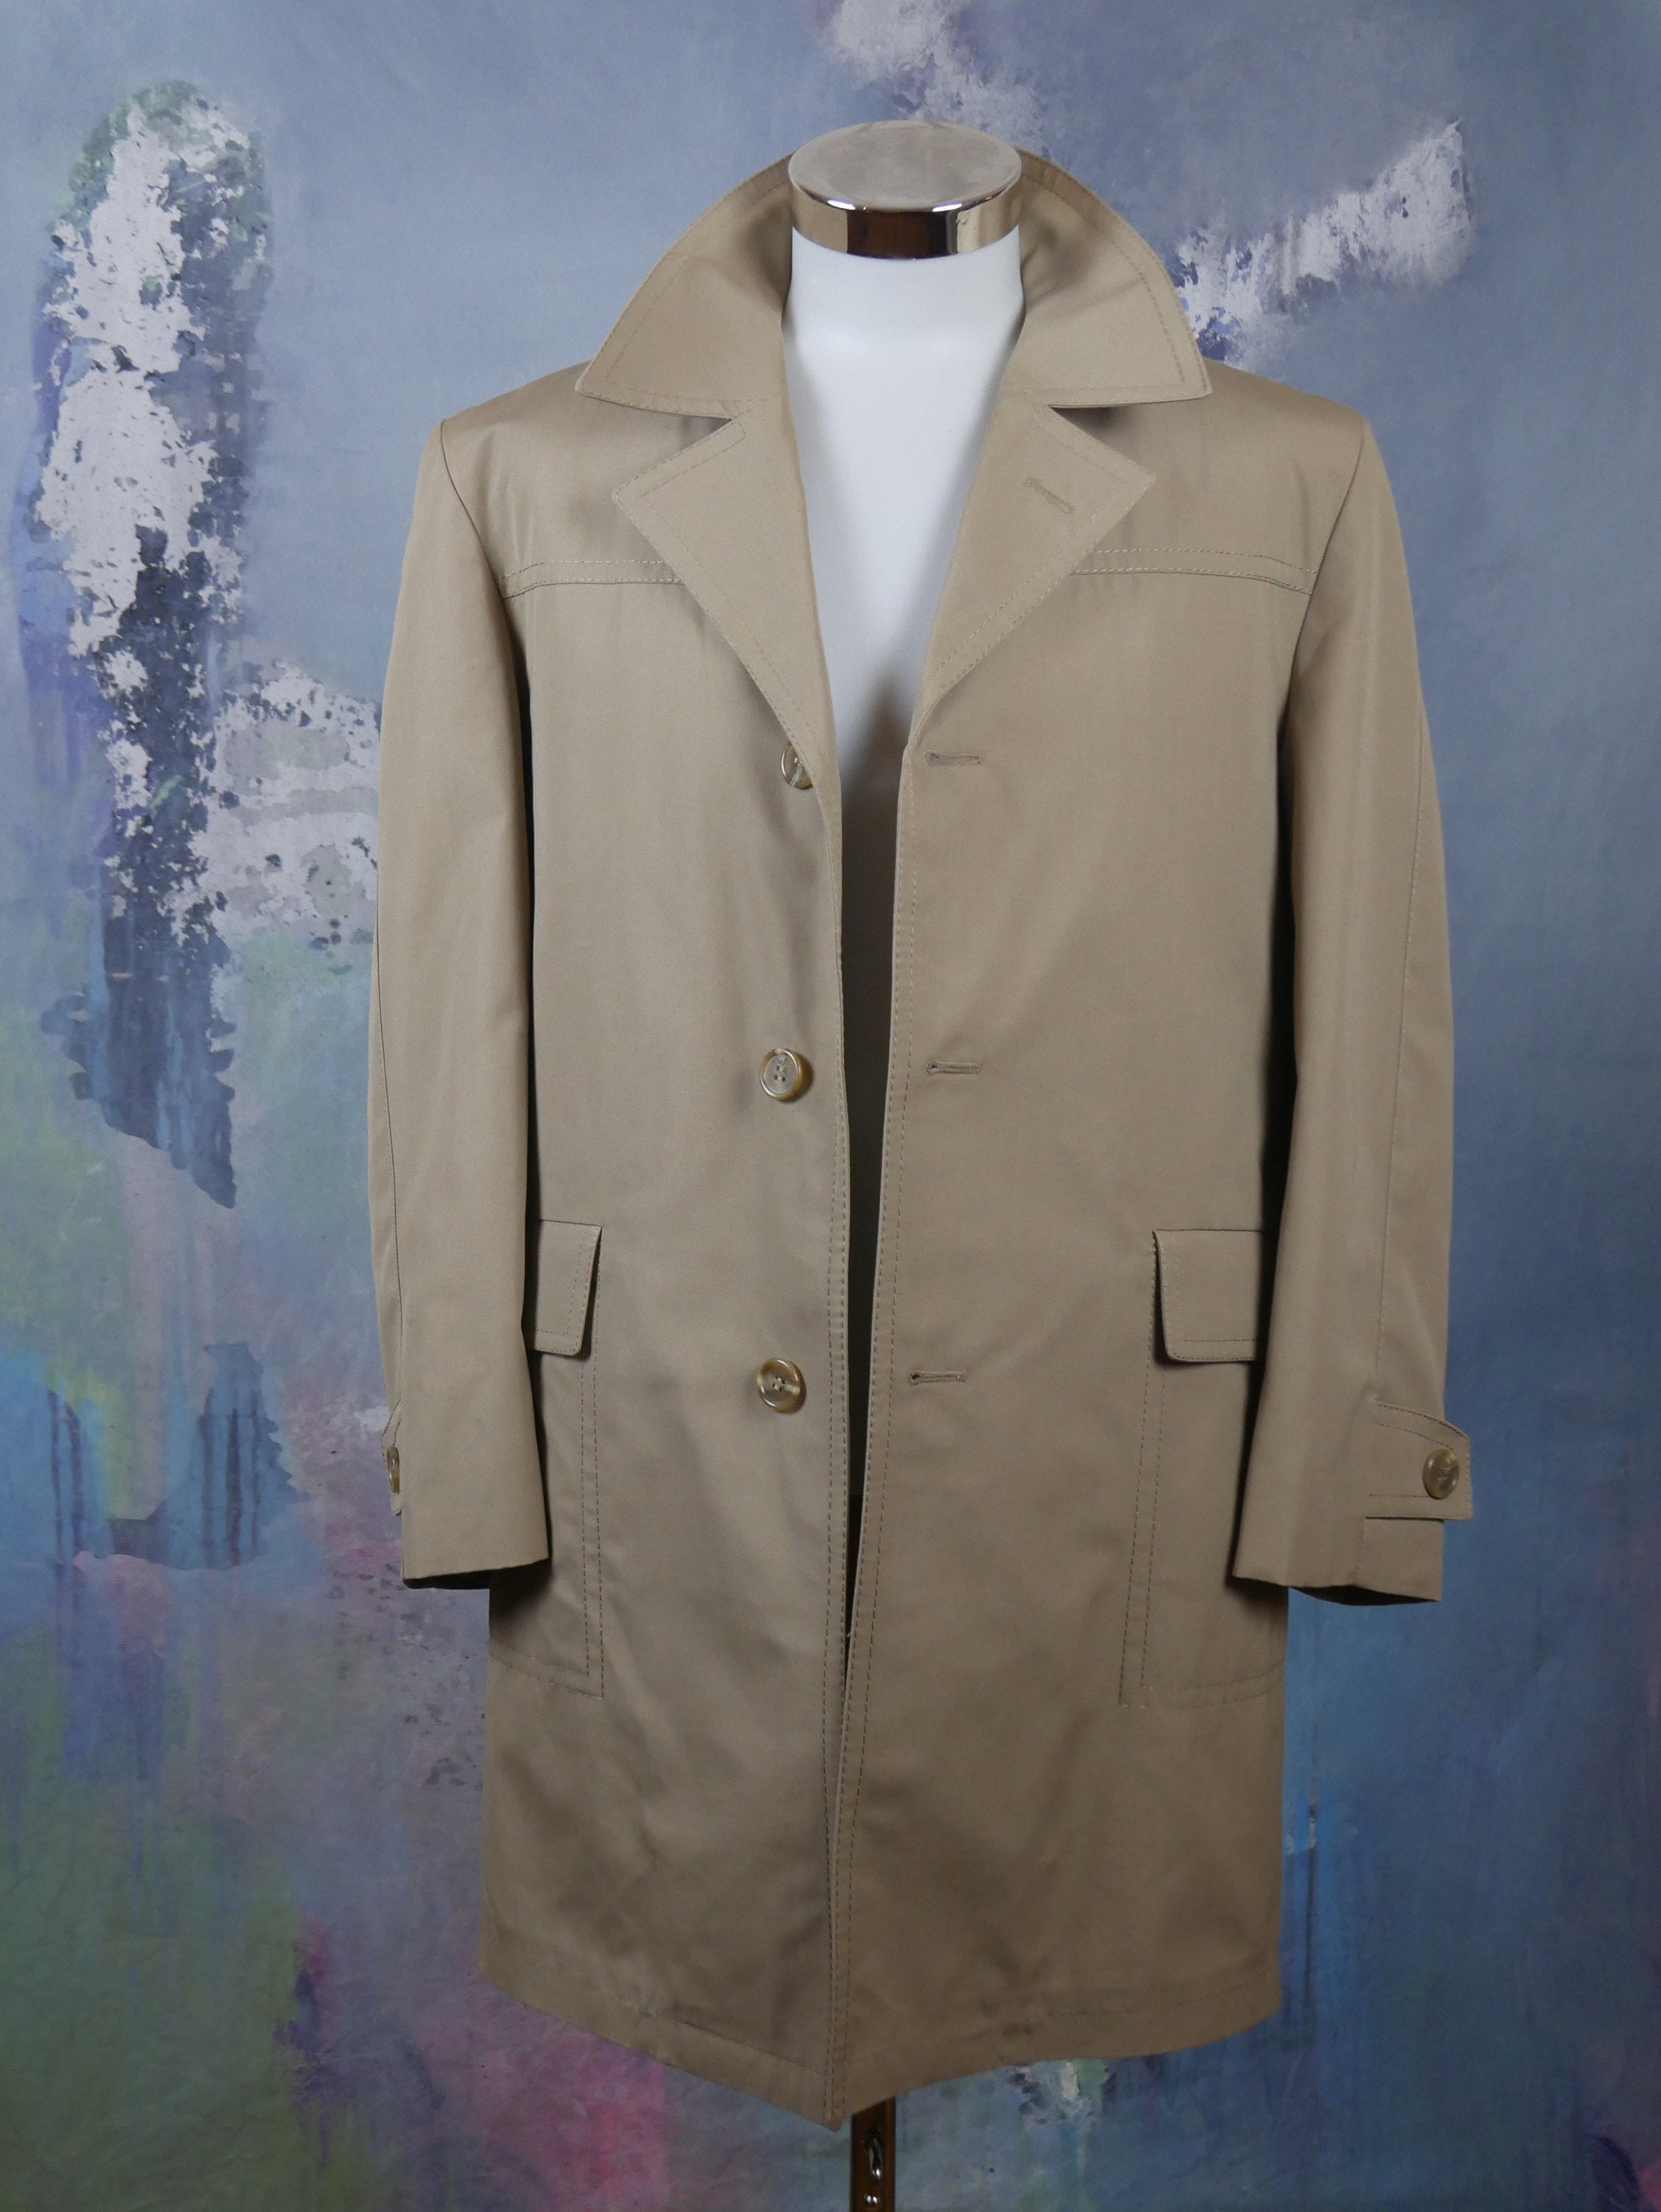 1970s Trench Coat European Vintage Beige Single-breasted - Etsy